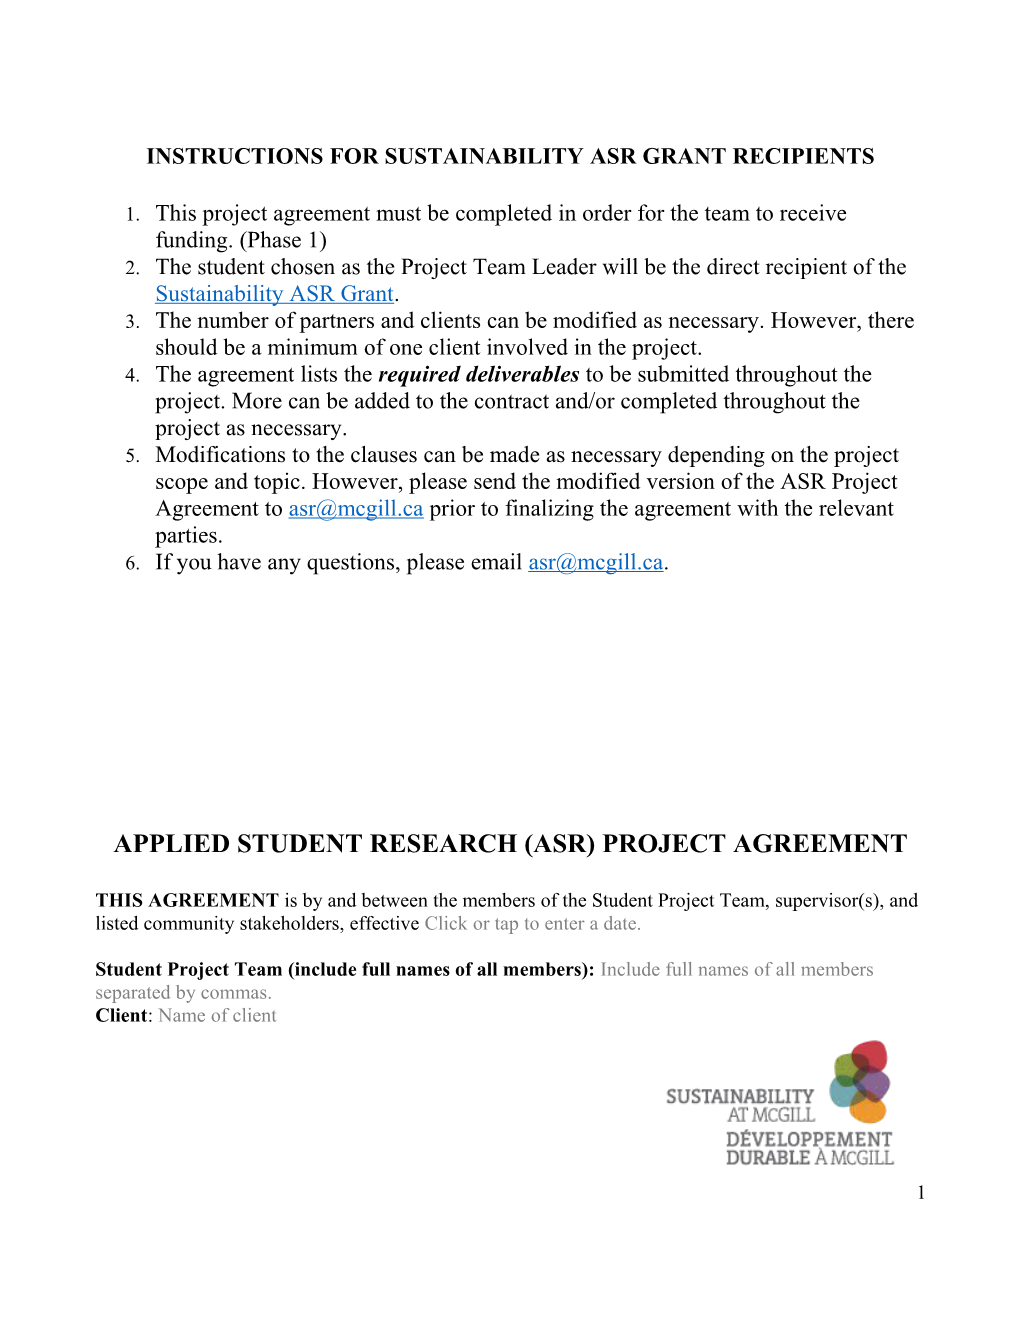 Instructions for Sustainability Asr Grant Recipients